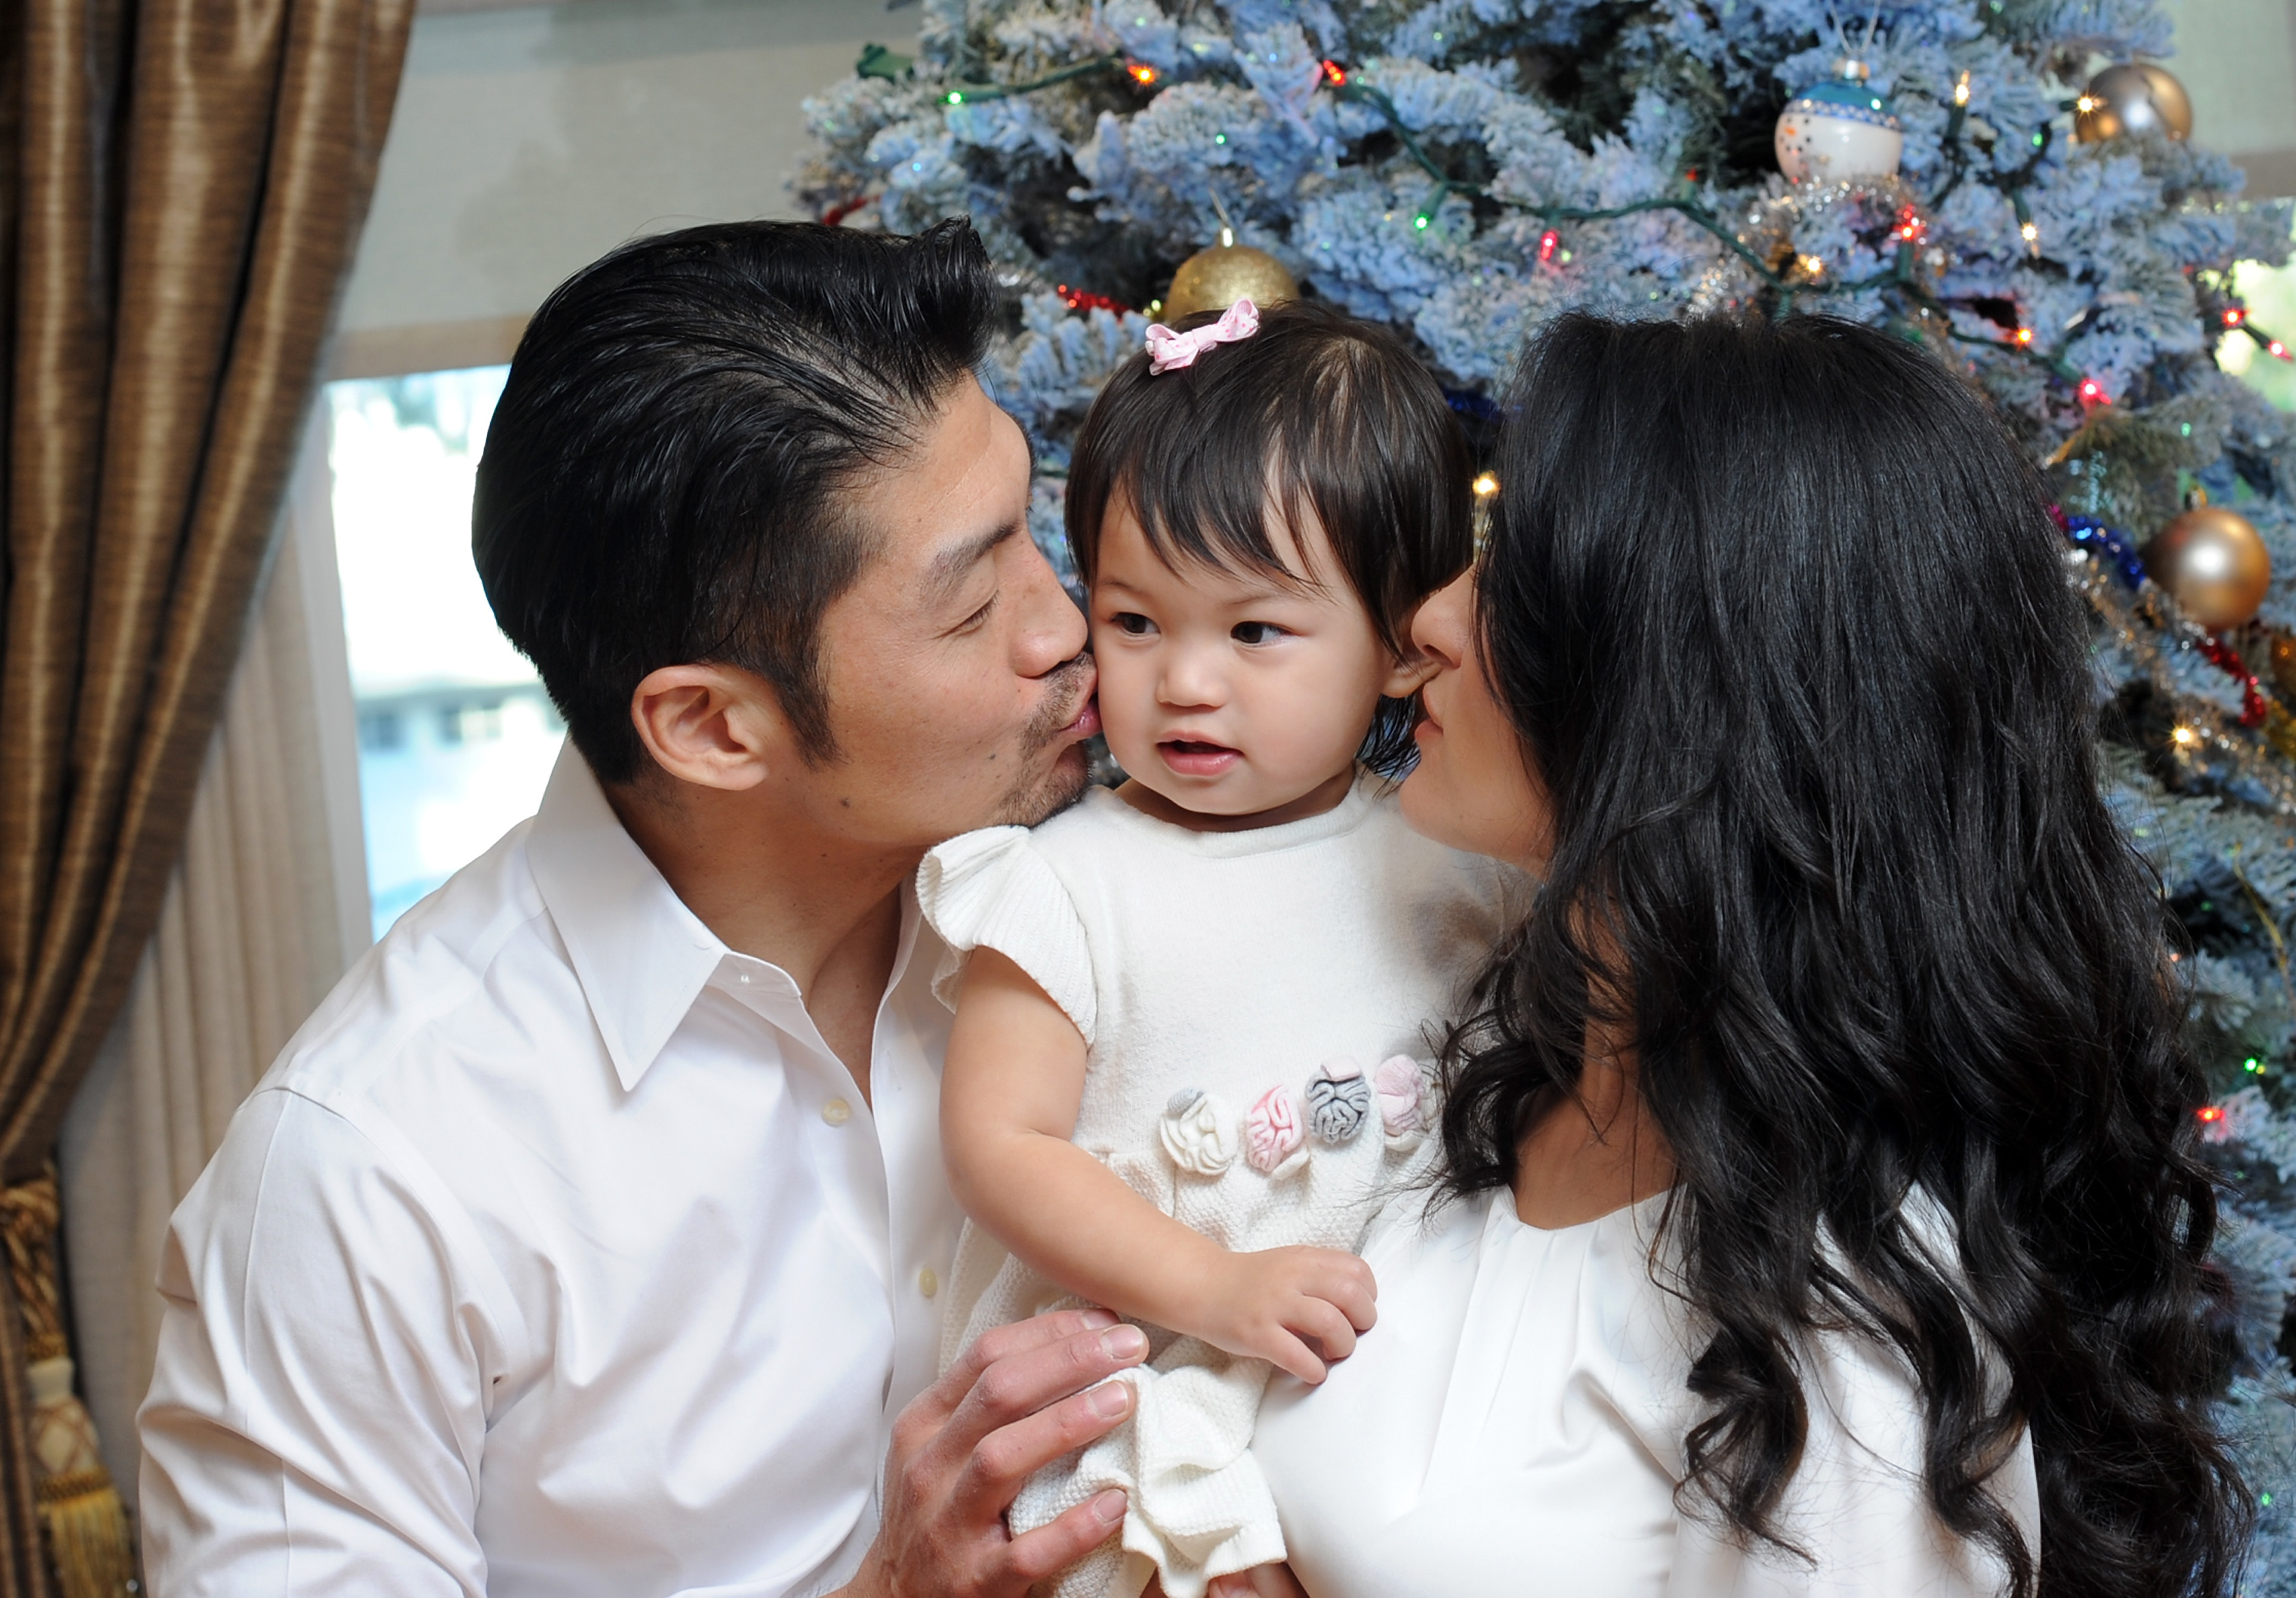 Brian Tee and Mirelly Taylor with daughter Madeline Skyer Tee on December 22, 2016, in Los Angeles, California.  | Source: Getty Images